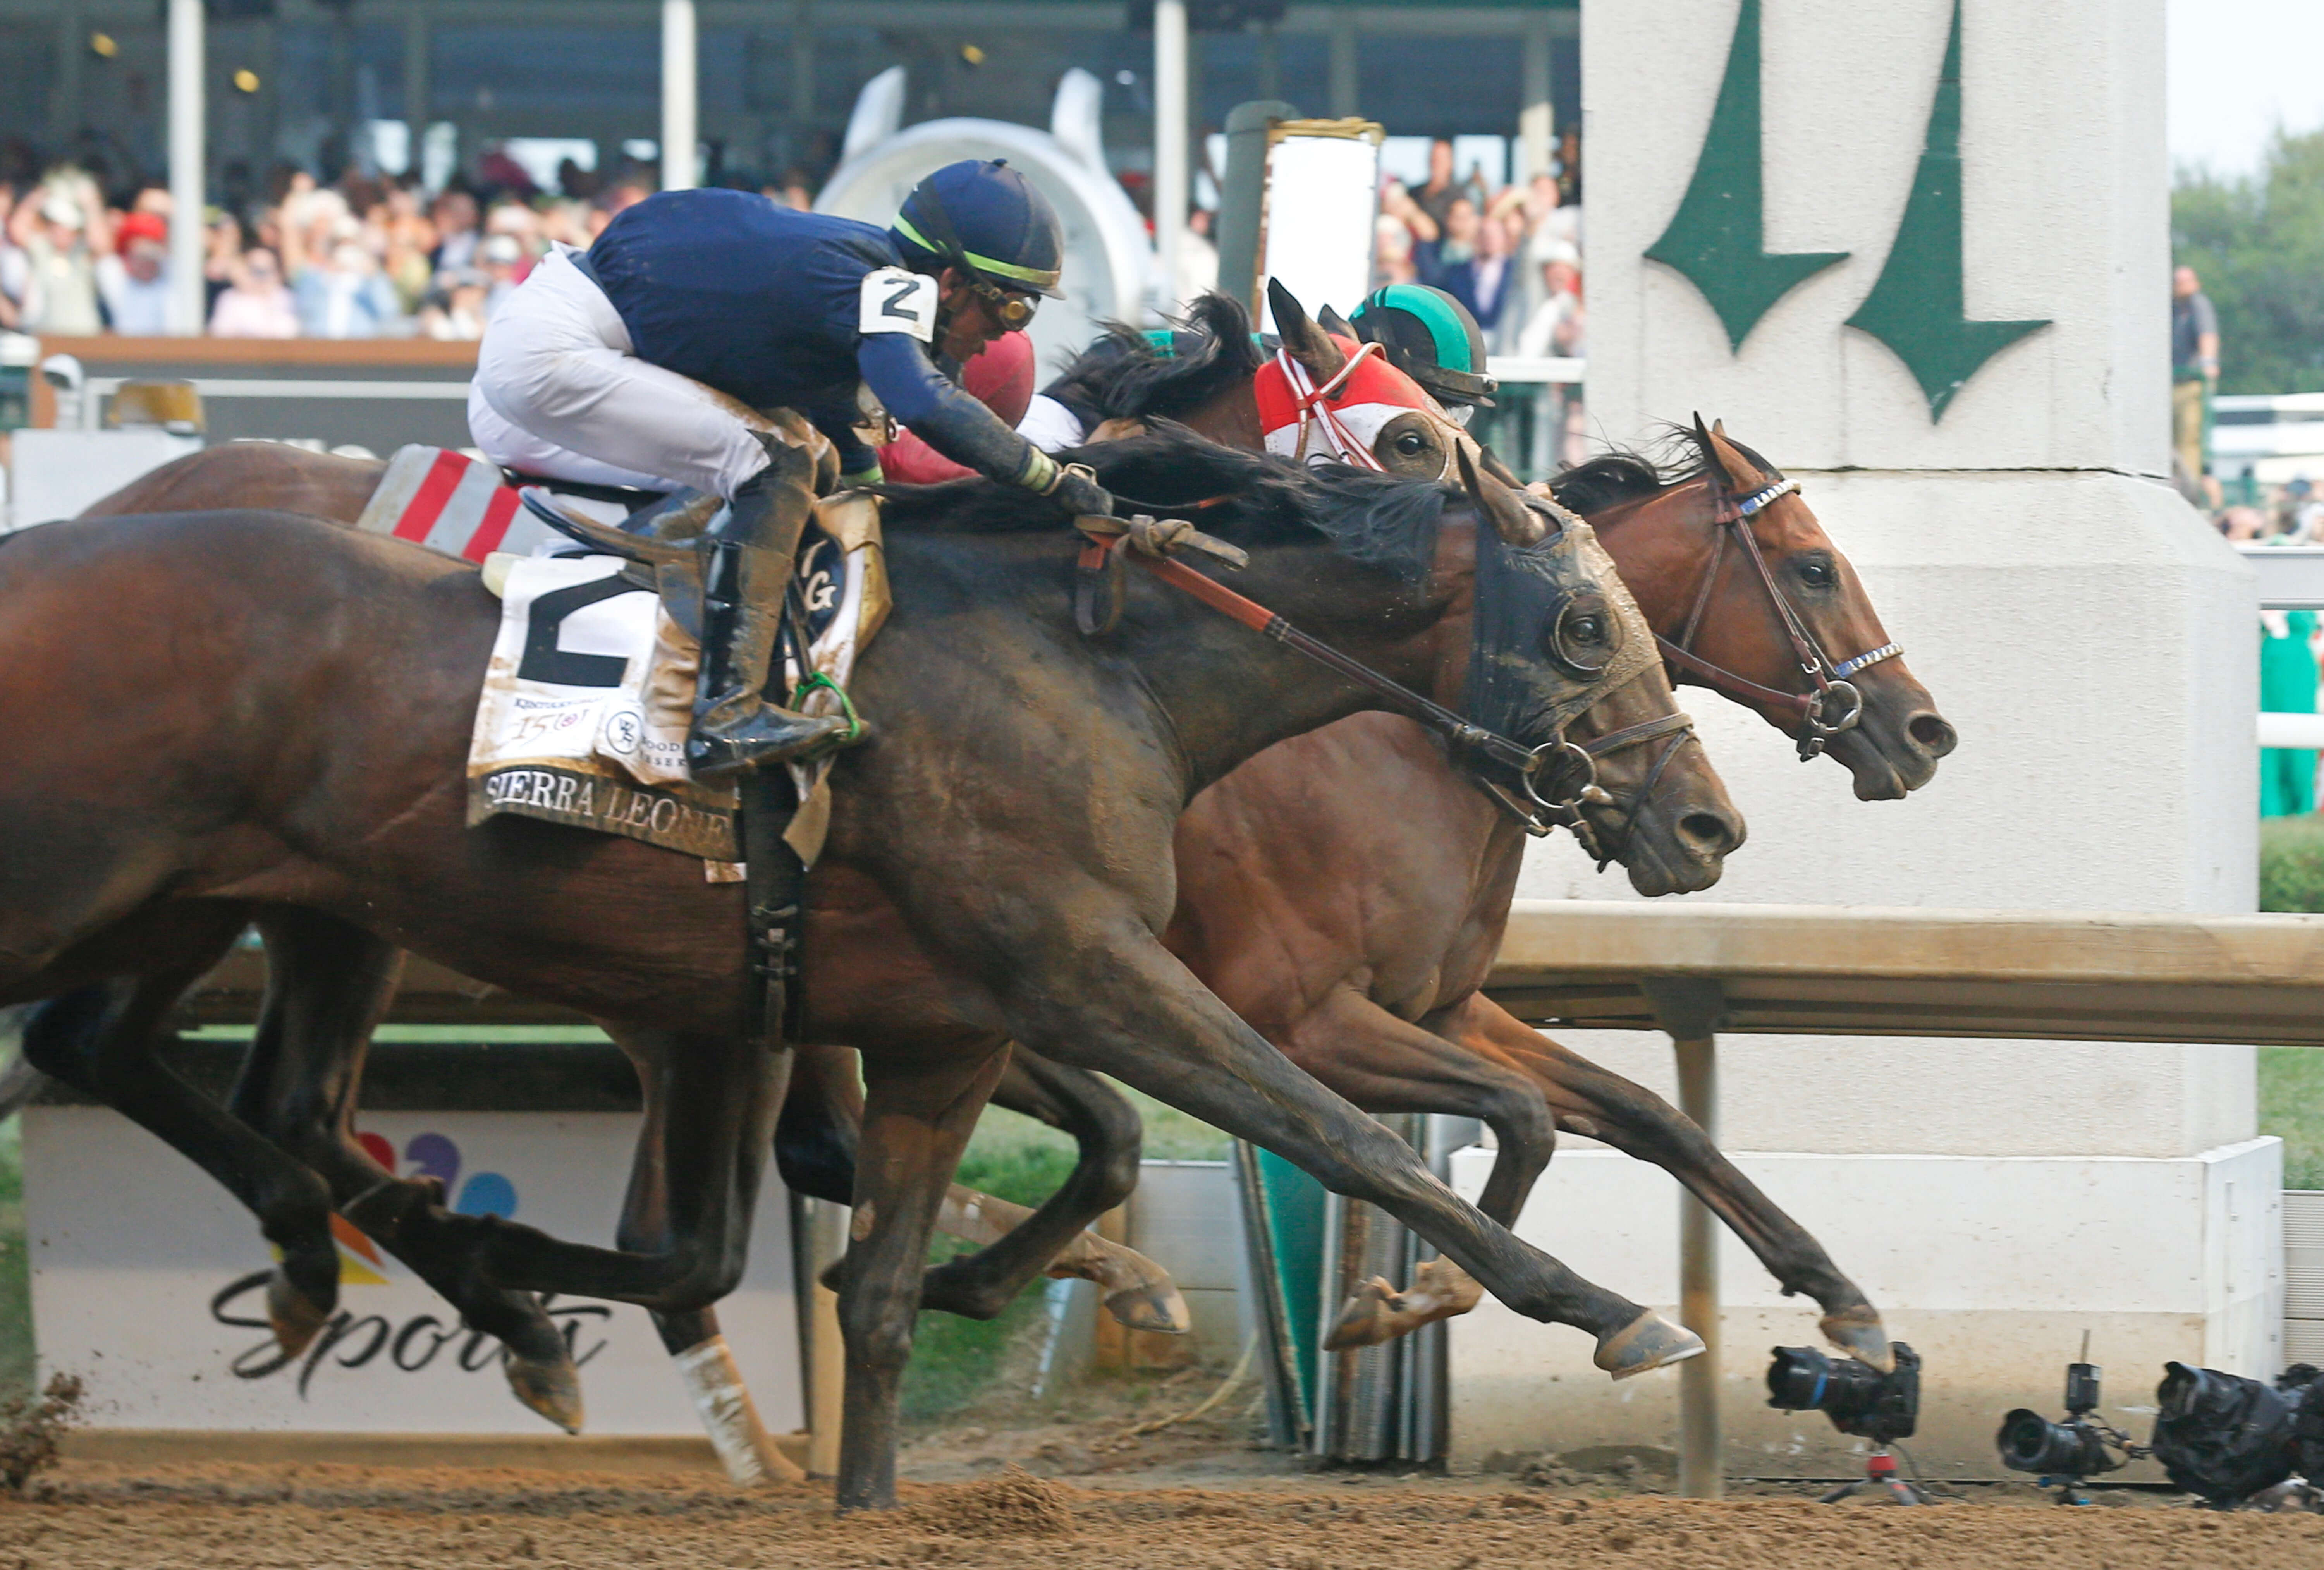 How To Bet - bet365 Offering Fixed Odds for Horse Racing in New Jersey, Colorado